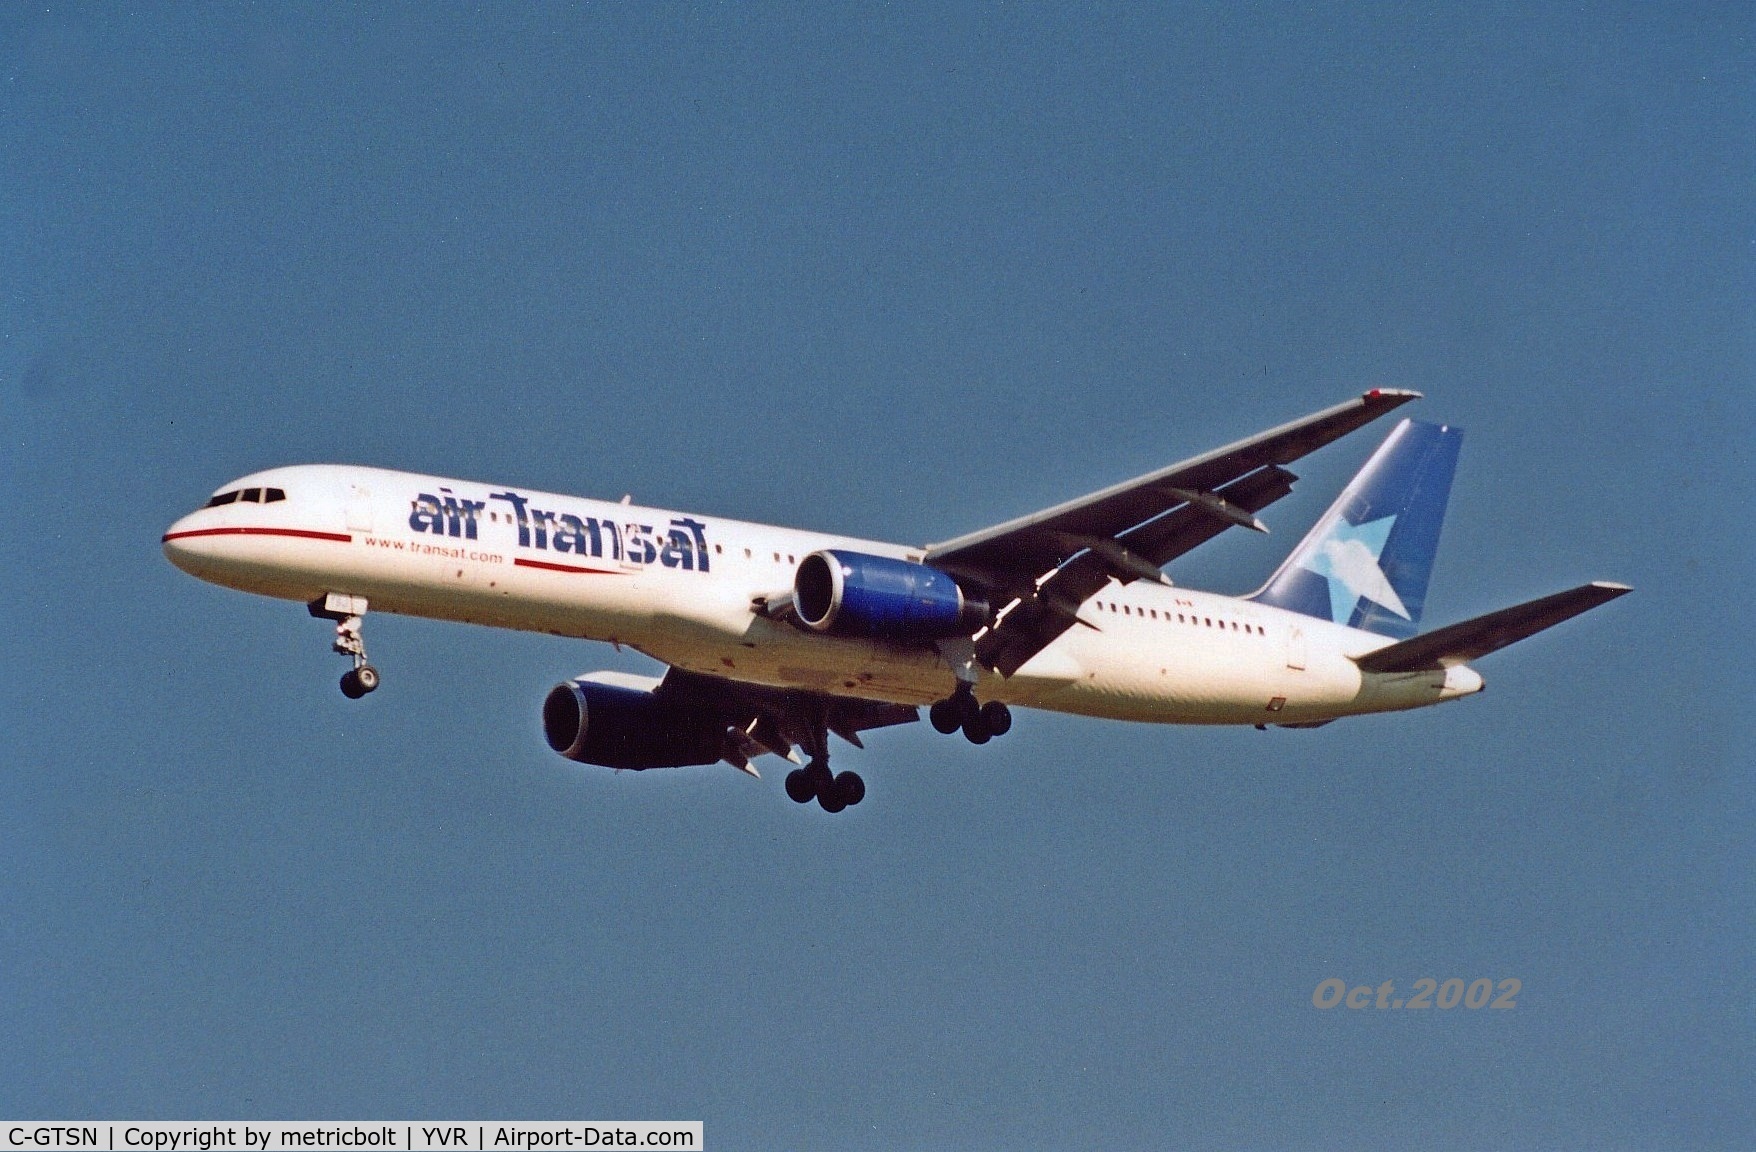 C-GTSN, 1990 Boeing 757-28A C/N 24543, YVR Oct.2002(aircraft leased Apr 1993 to May 2003)